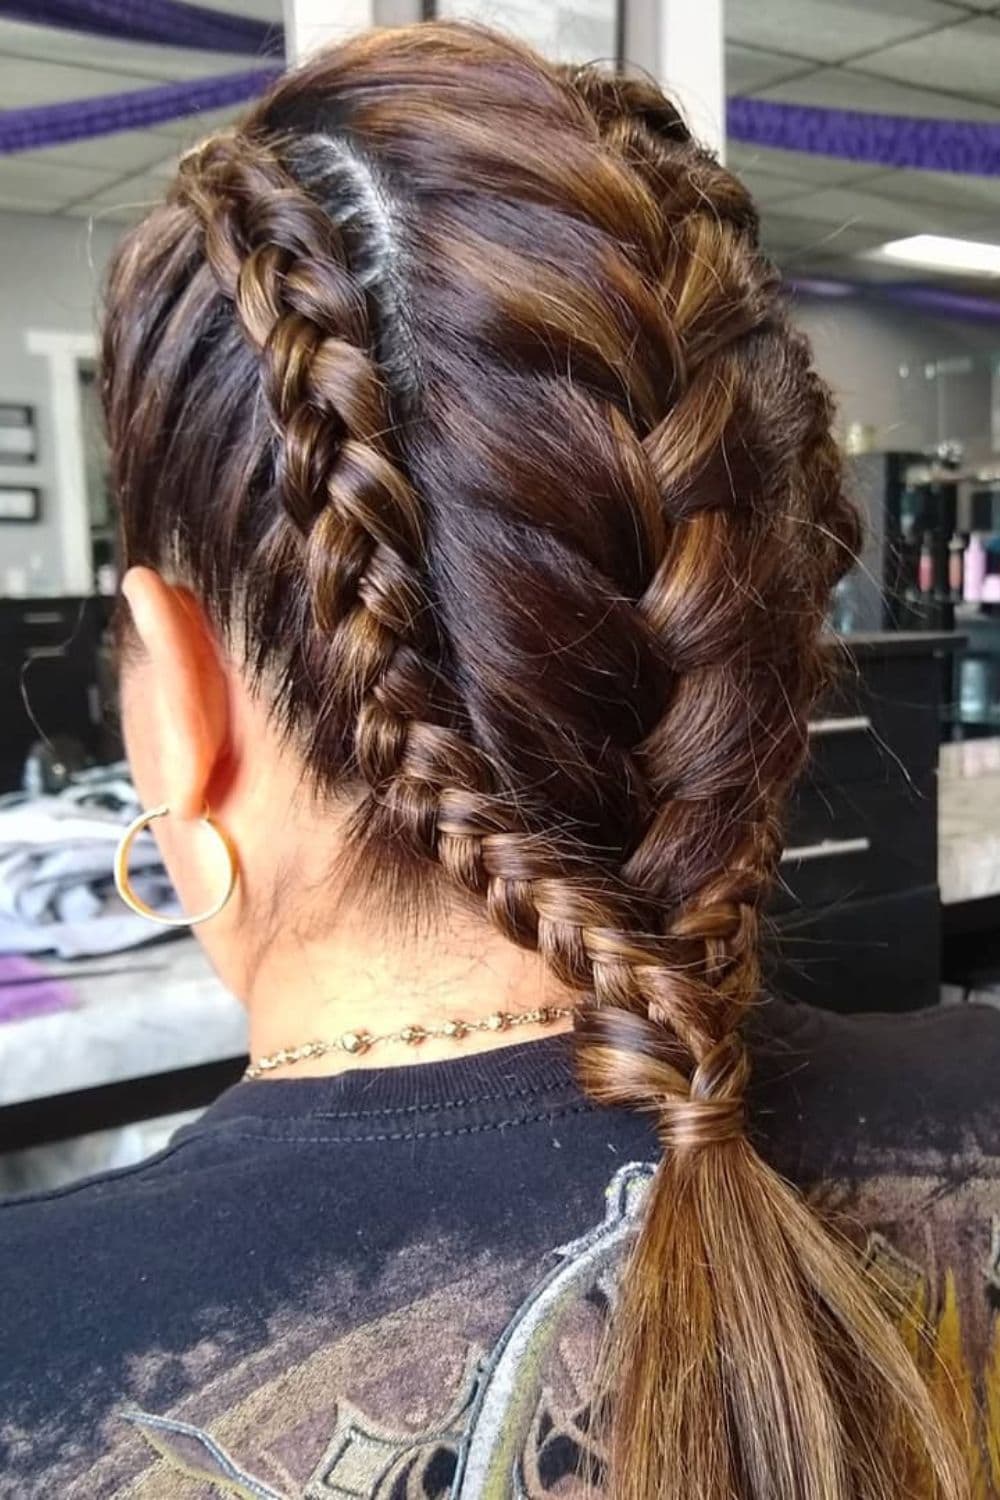 Close-up shot of a woman's French braid mohawk.